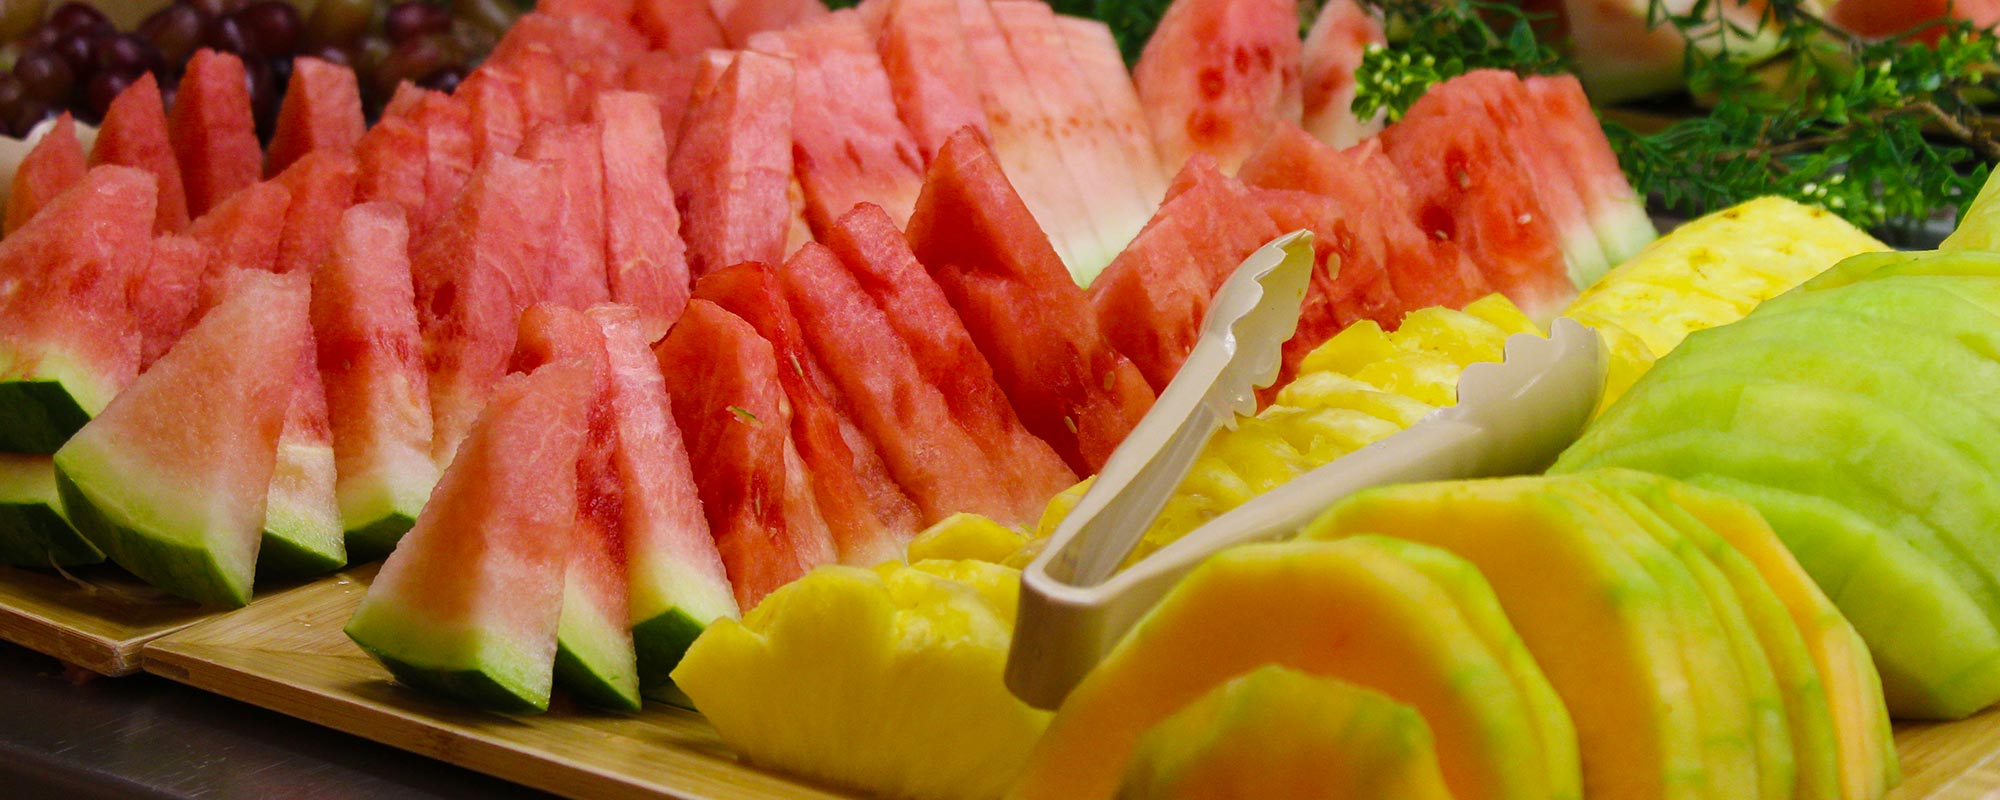 Watermelon, Pineapple and Melon Slices